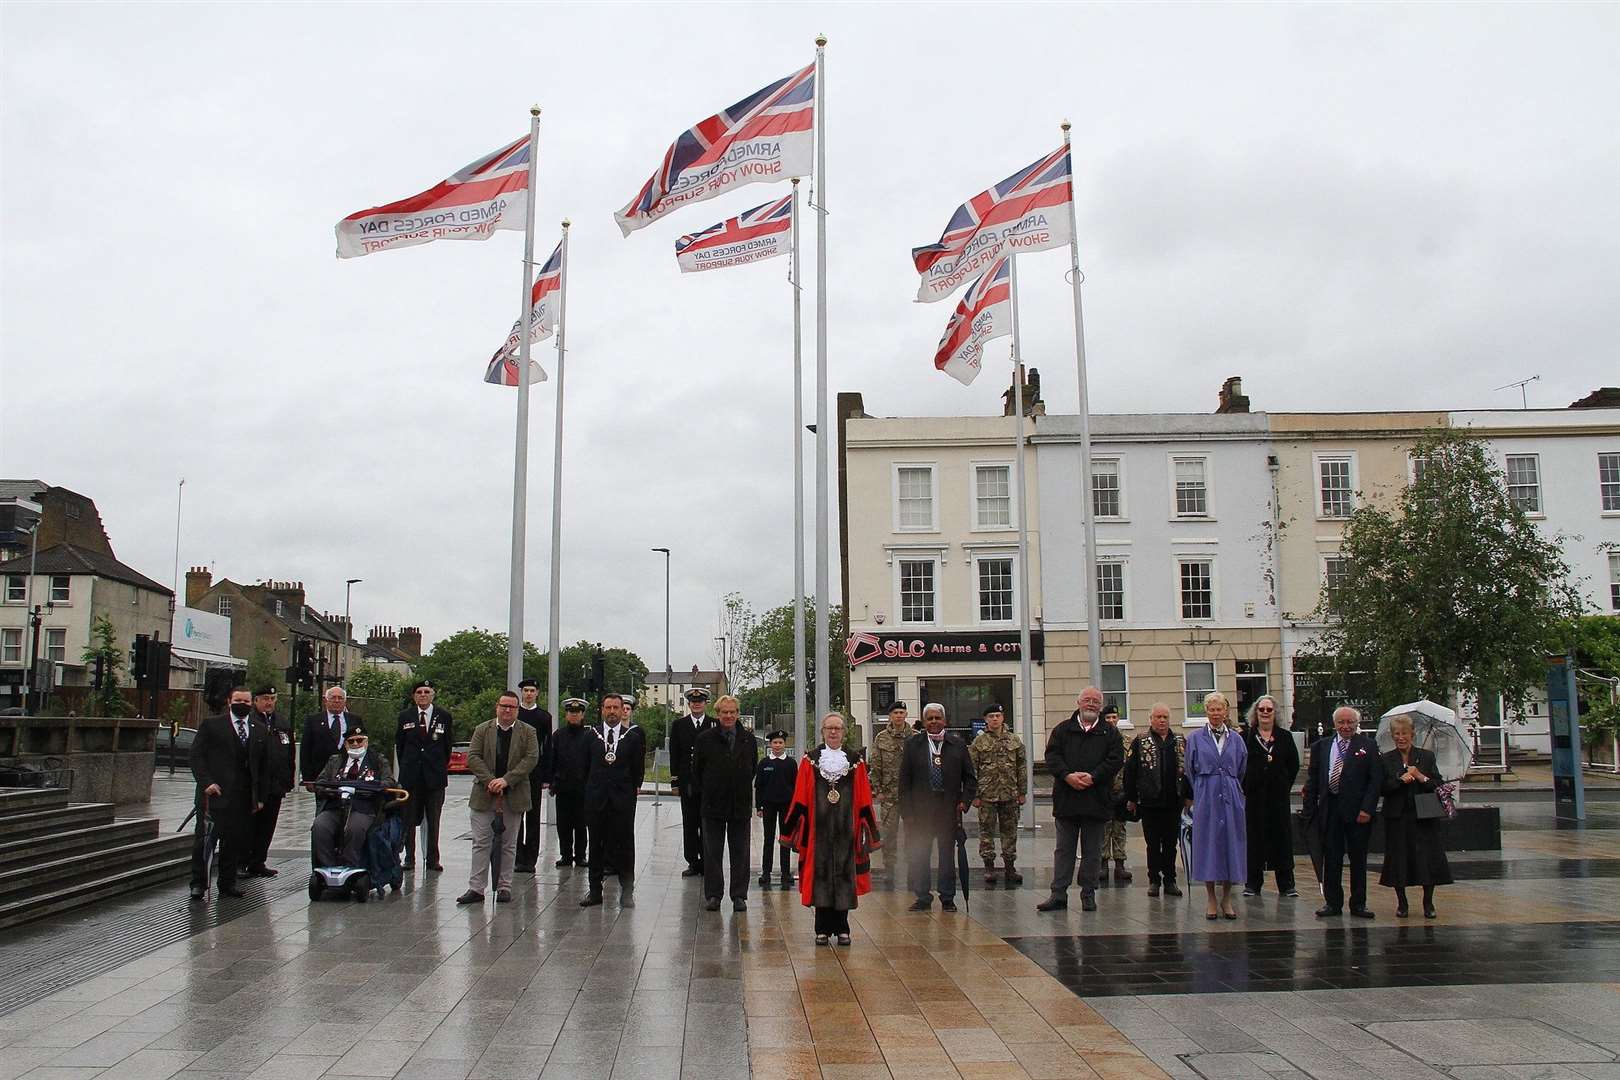 A flag-raising ceremony took place earlier this week in Gravesend